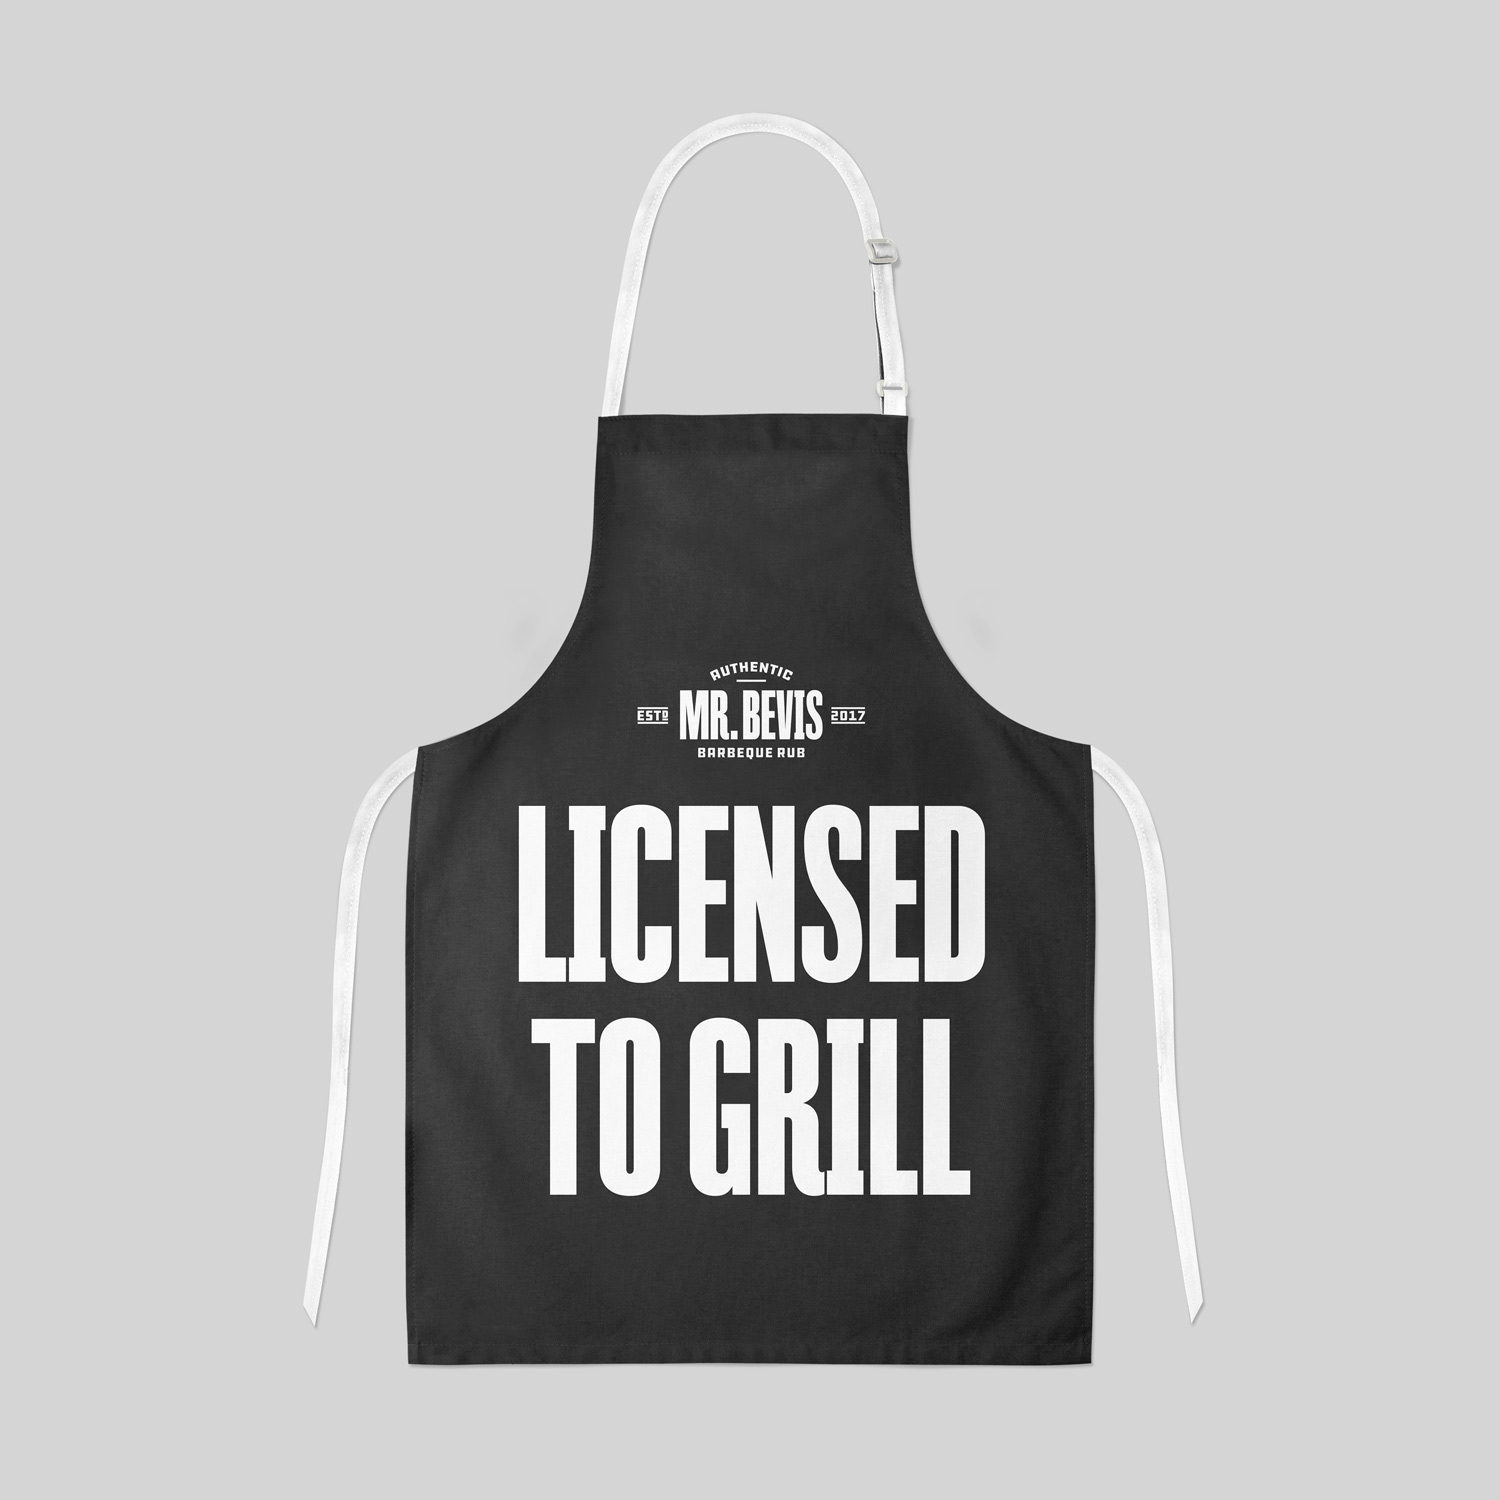 liscensed_to_grill.jpg